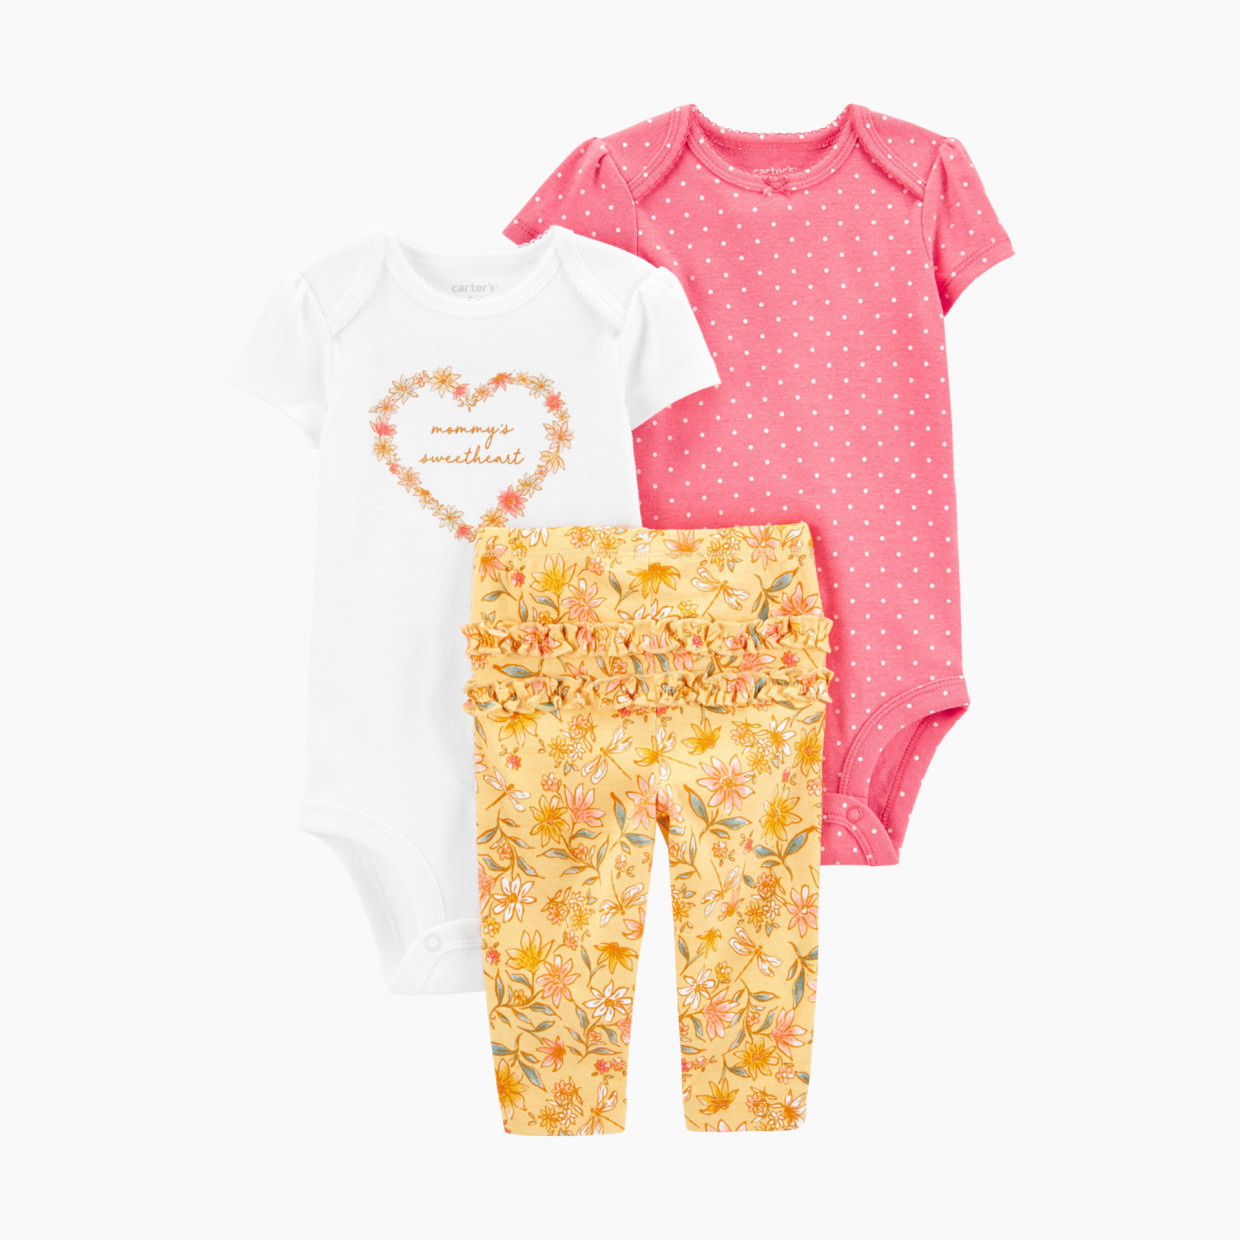 Carter's 3-Piece Floral Little Character Set - Yellow Flowers/Hearts/Pink, Nb.